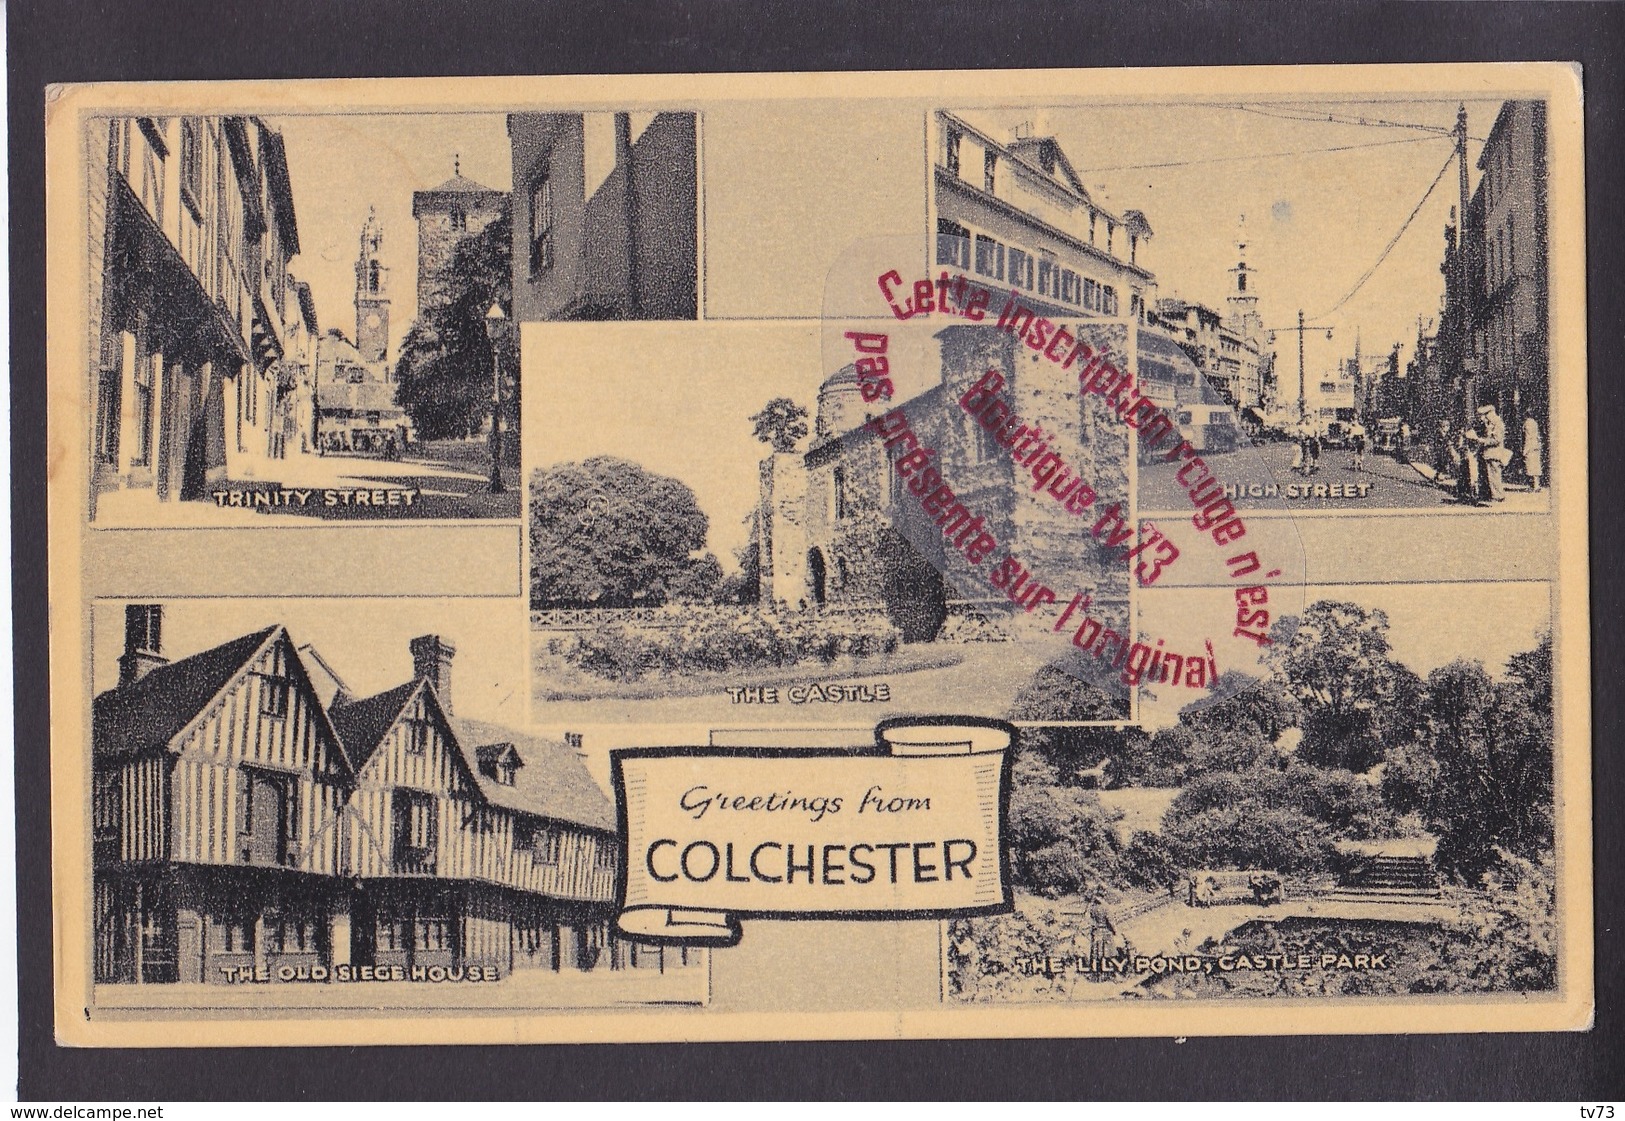 Q2288 - Greetings From COLCHESTER - Angleterre - Colchester